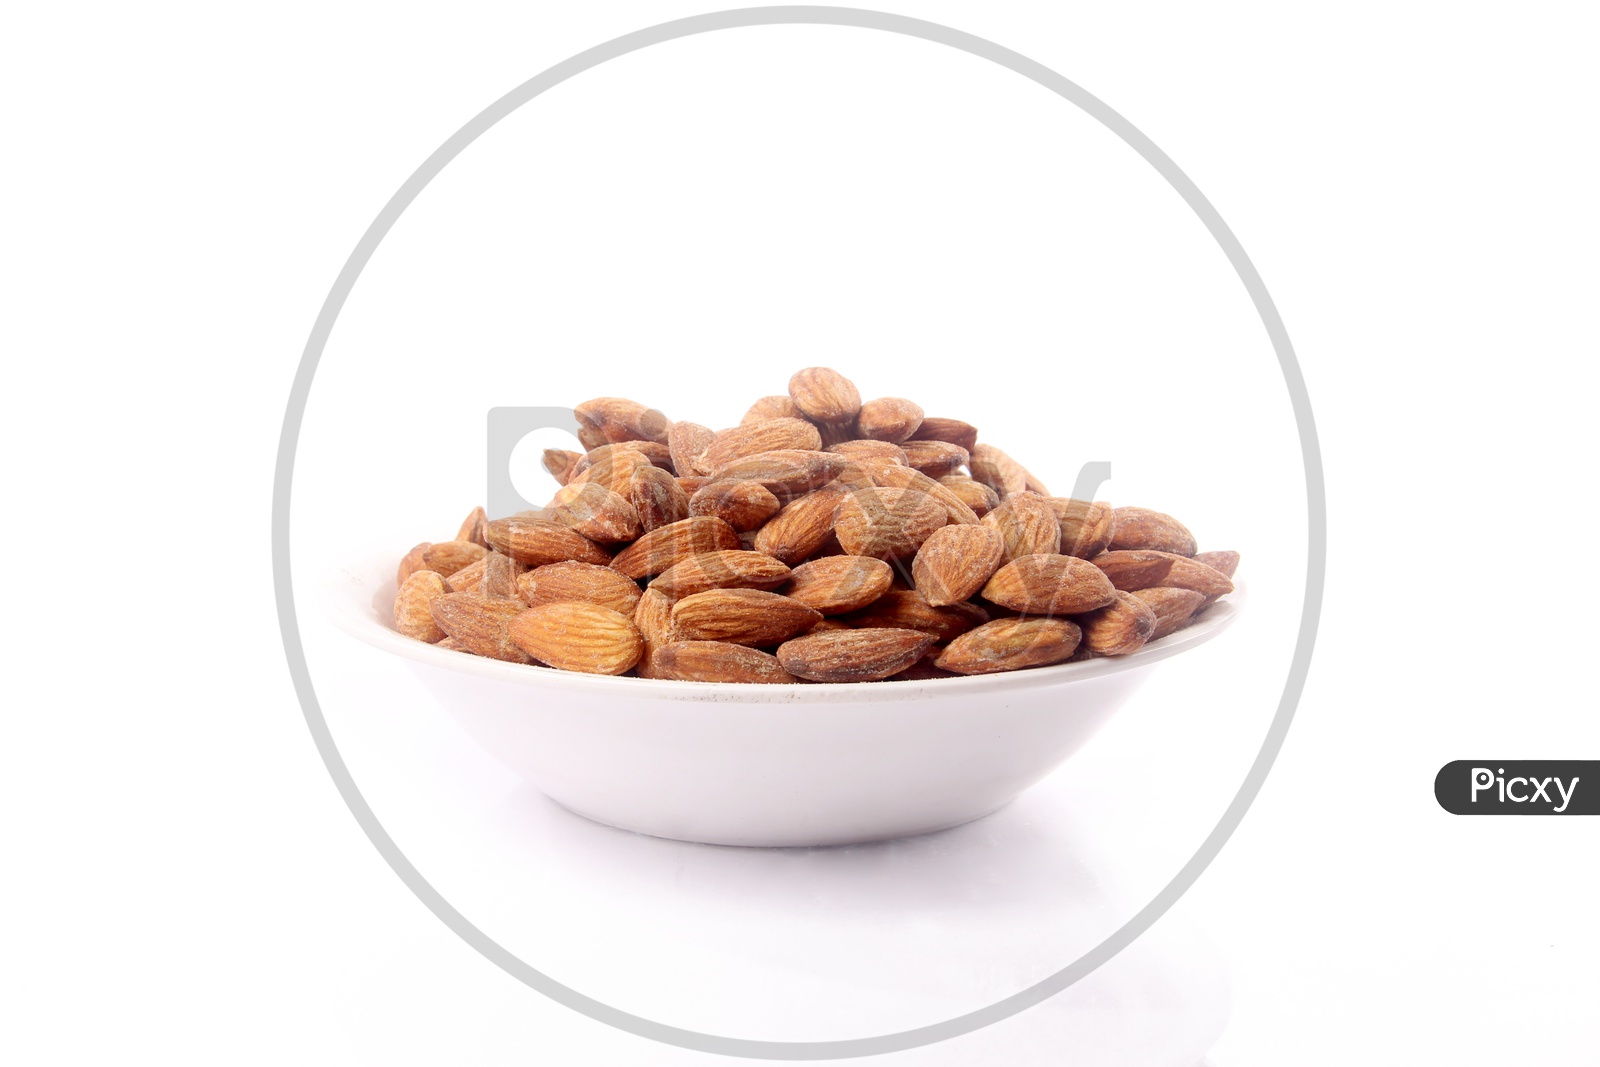 Roasted Almond Or Badam Nuts In a  Bowl On an Isolated White Background